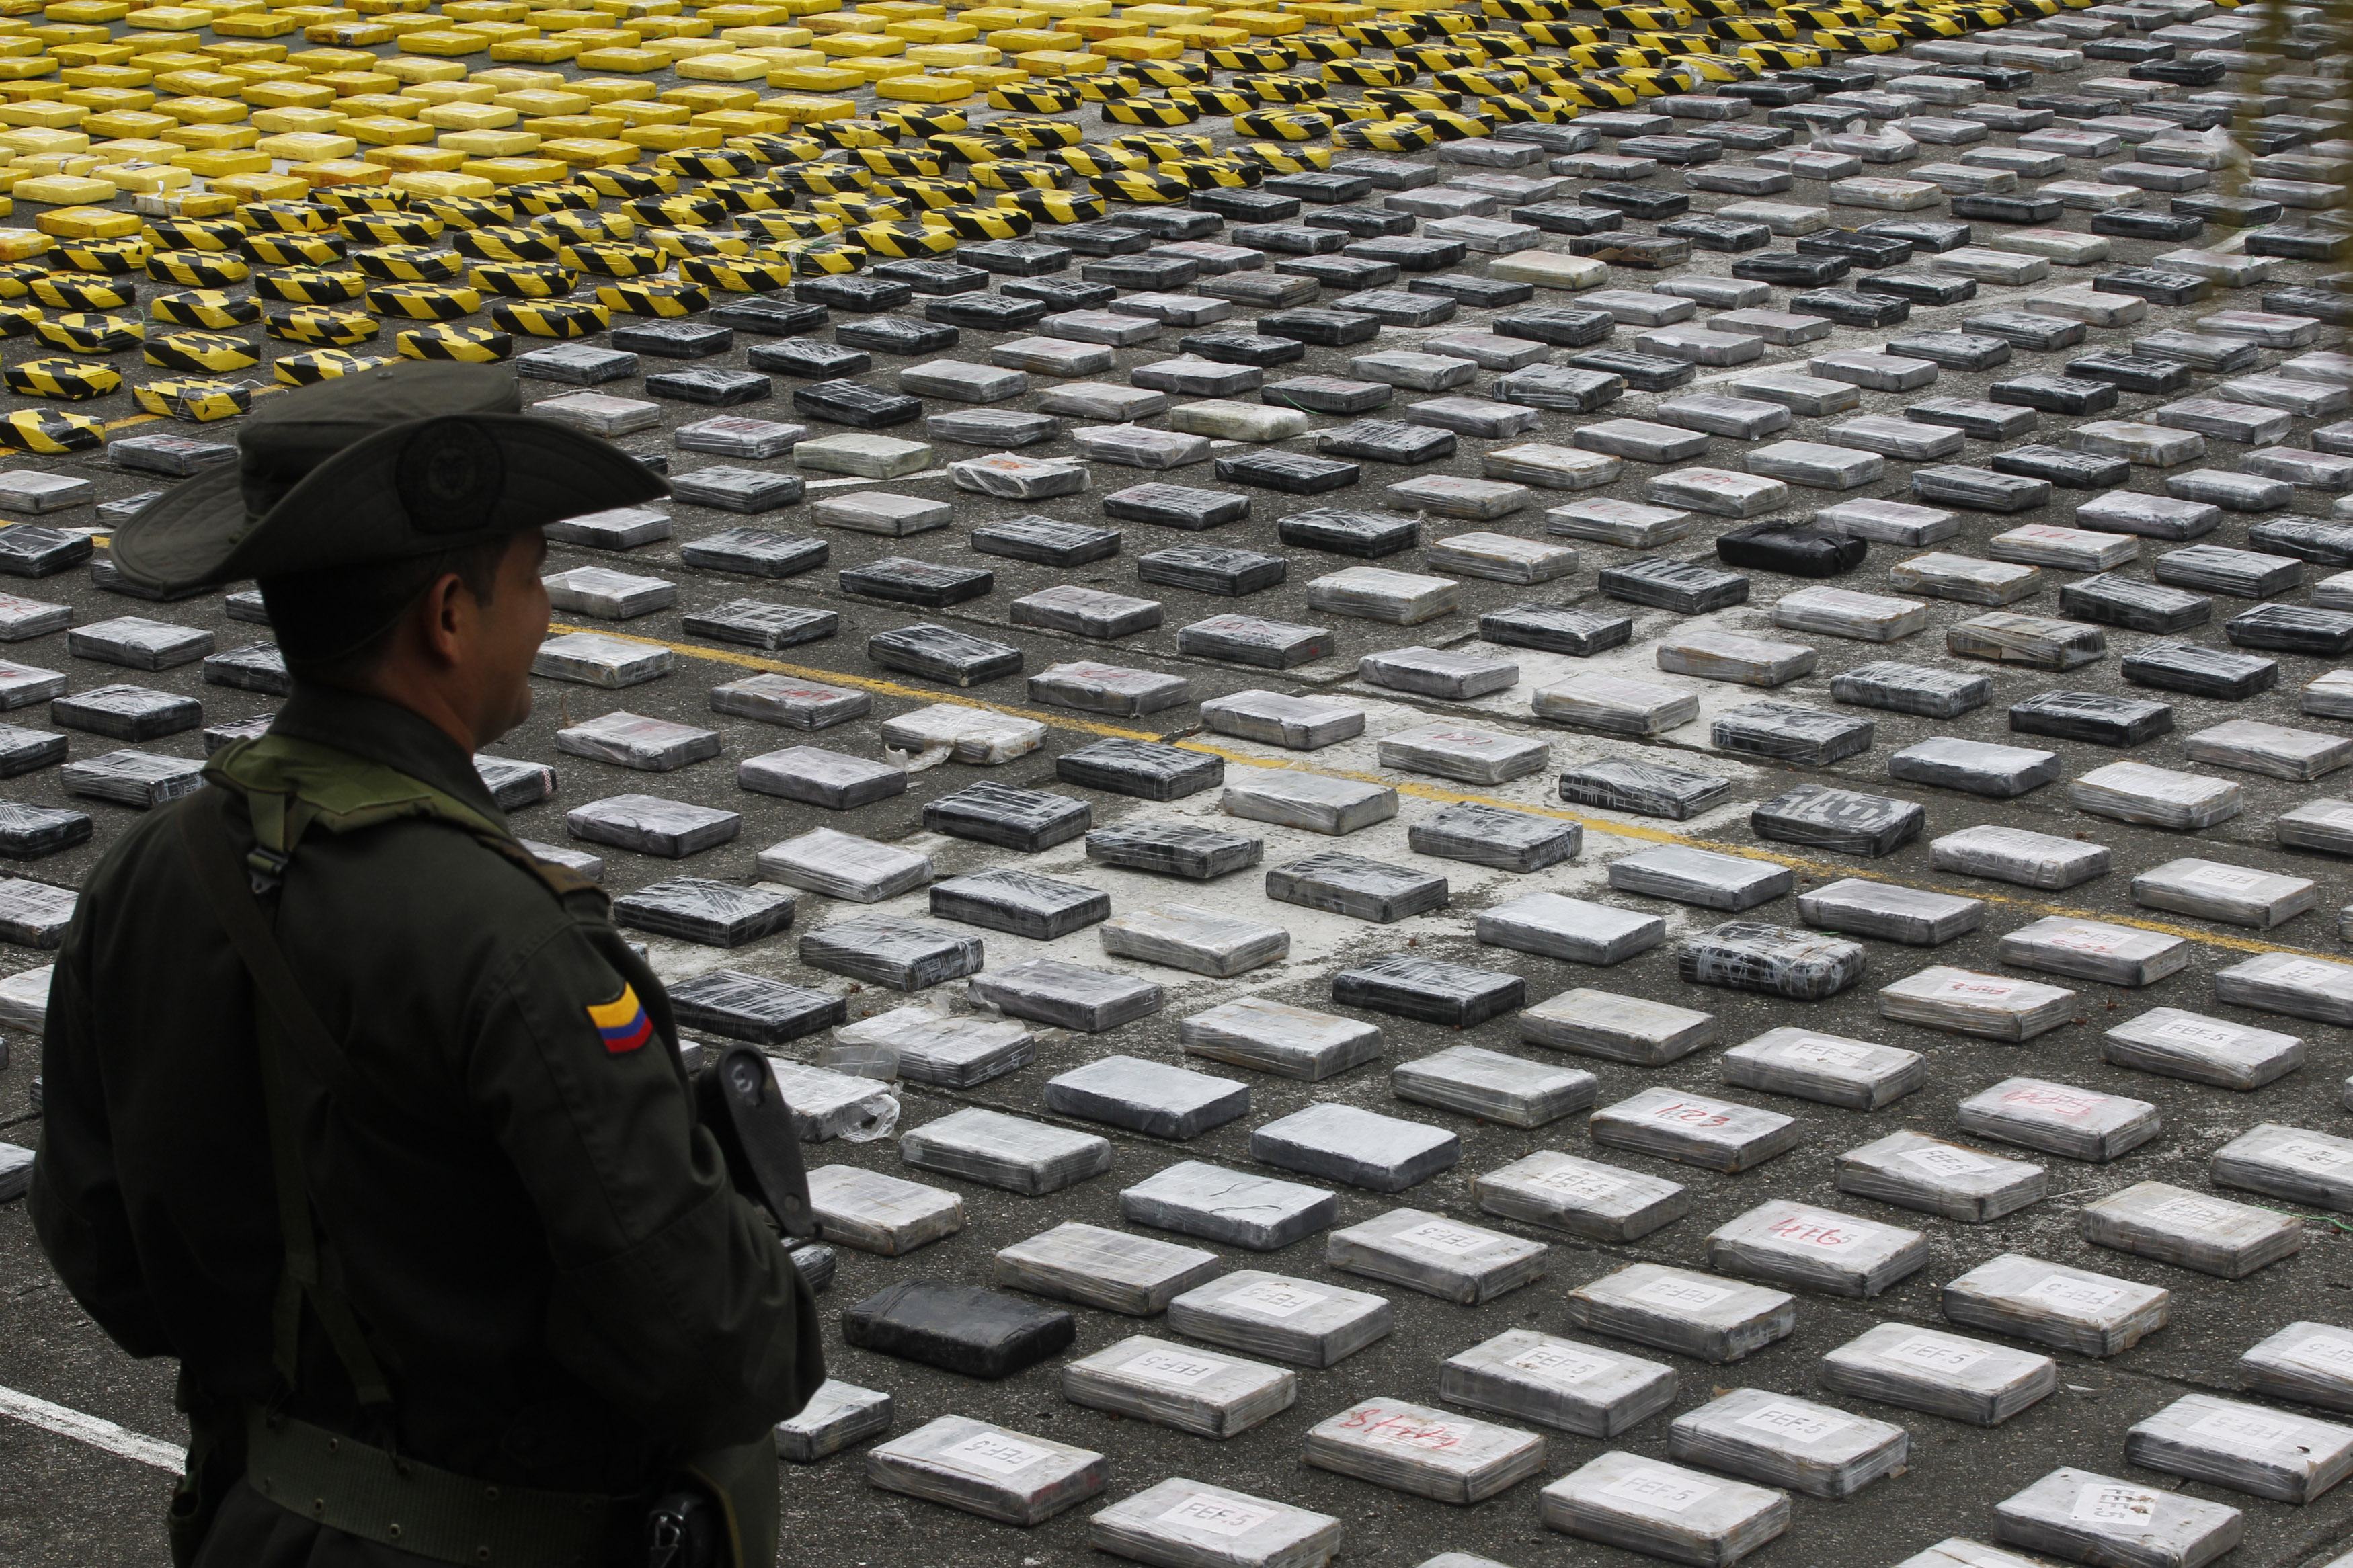 An anti-narcotics policeman guards seized packs of cocaine at a military base in Colombia. Photo: Reuters